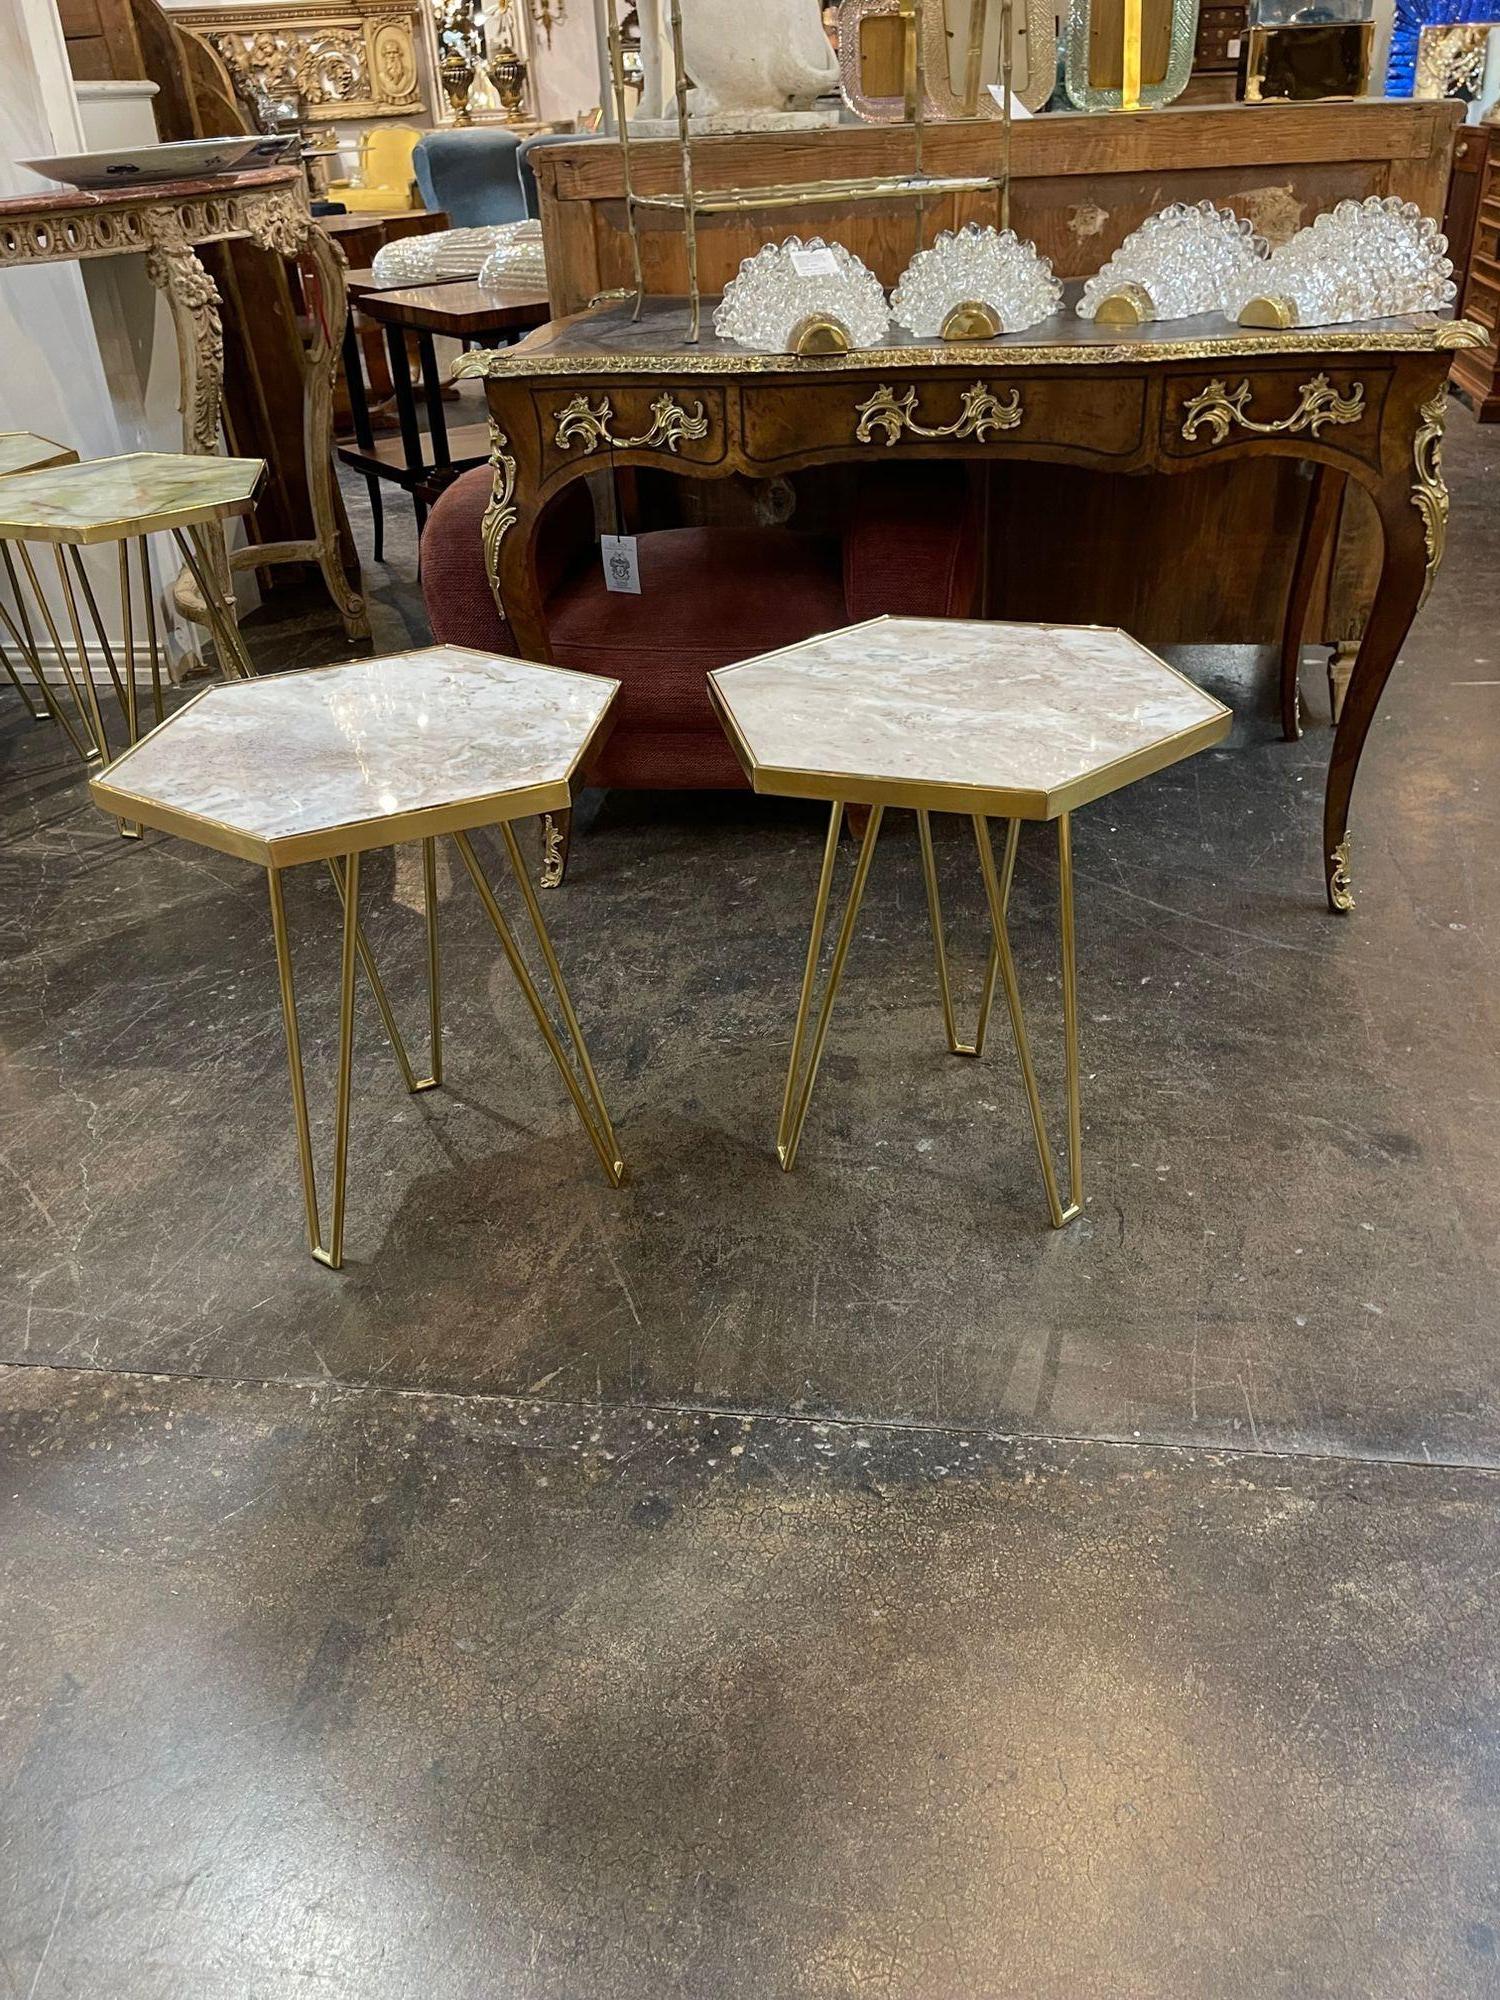 Modern Italian hex form table in polished brass and creme marble. Circa 2000. Perfect for today's transitional designs!